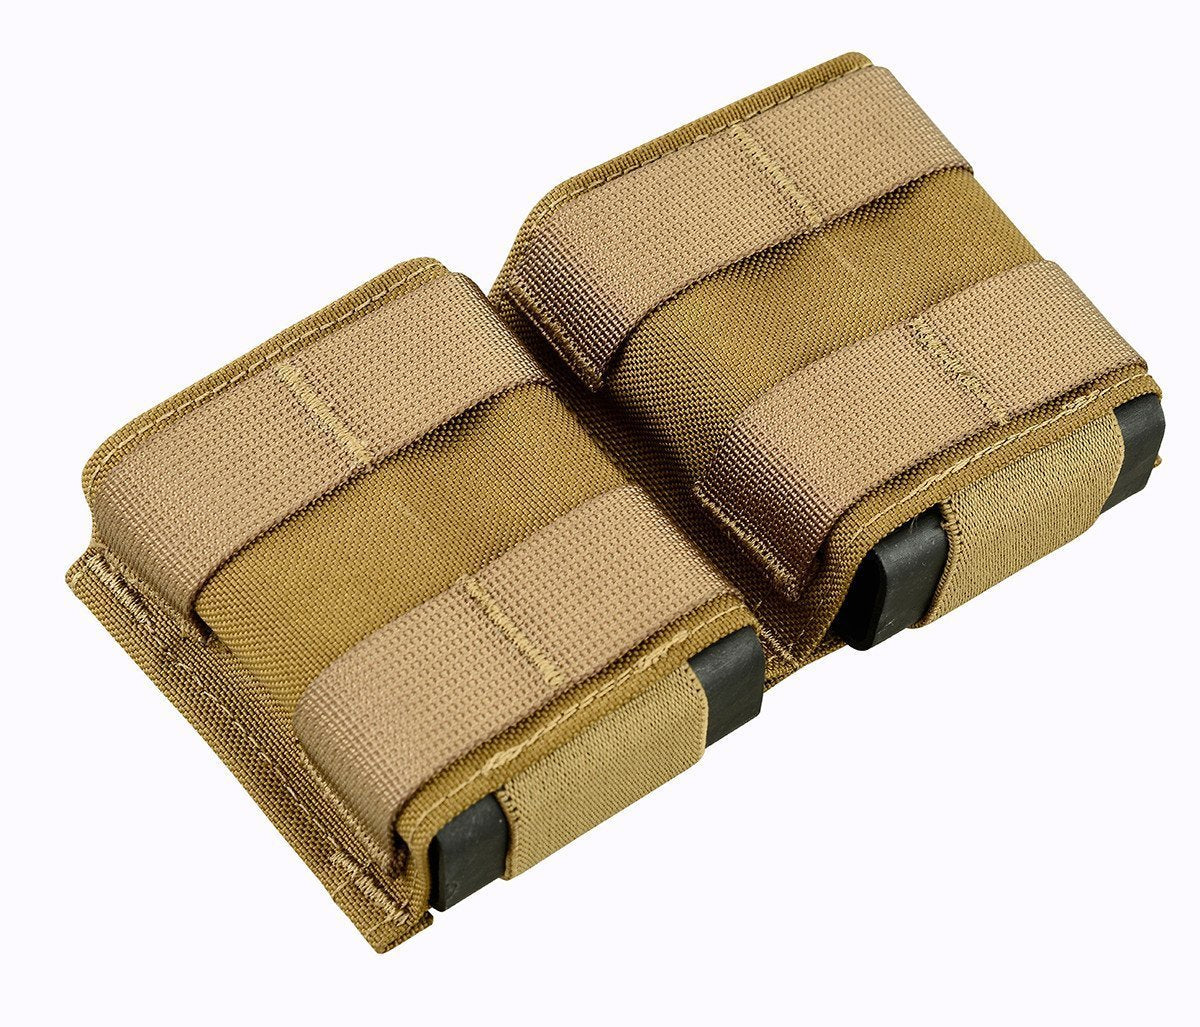 SHE-23032 GRIPTAC DOUBLE M4/M16  MAG POUCH coyote side pic